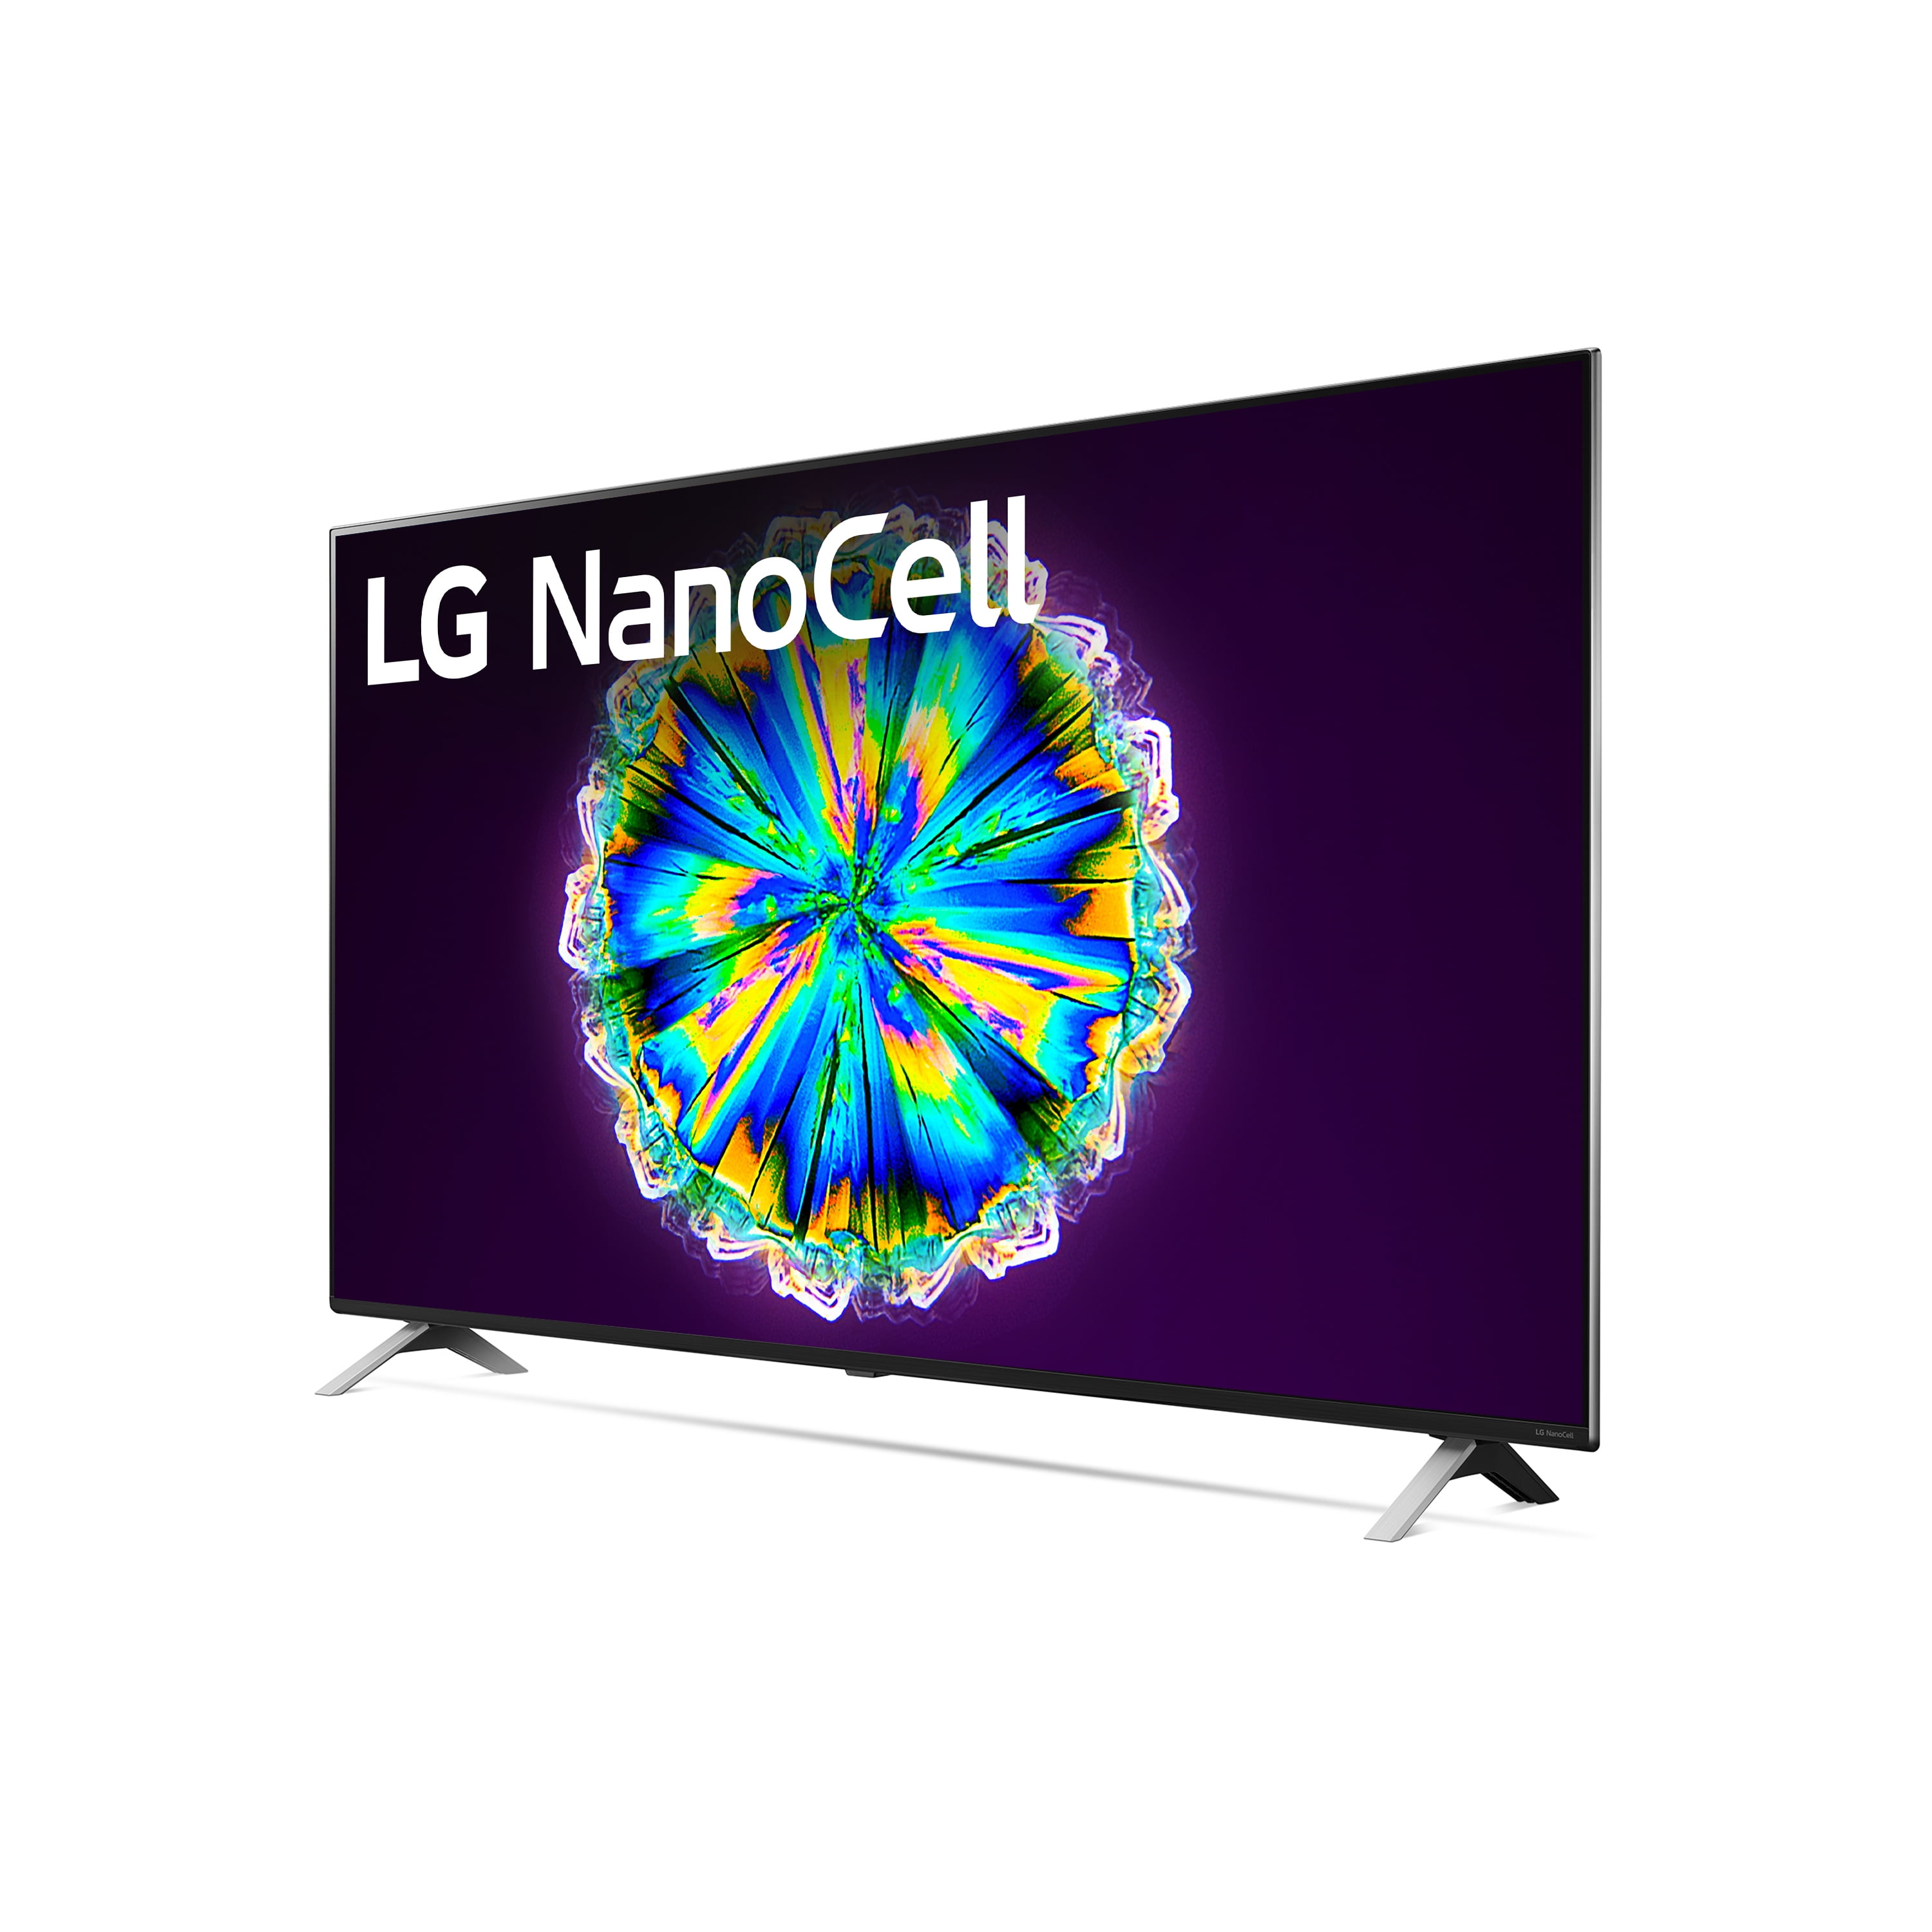 LG 55 Class 4K UHD 2160P NanoCell Smart TV with HDR